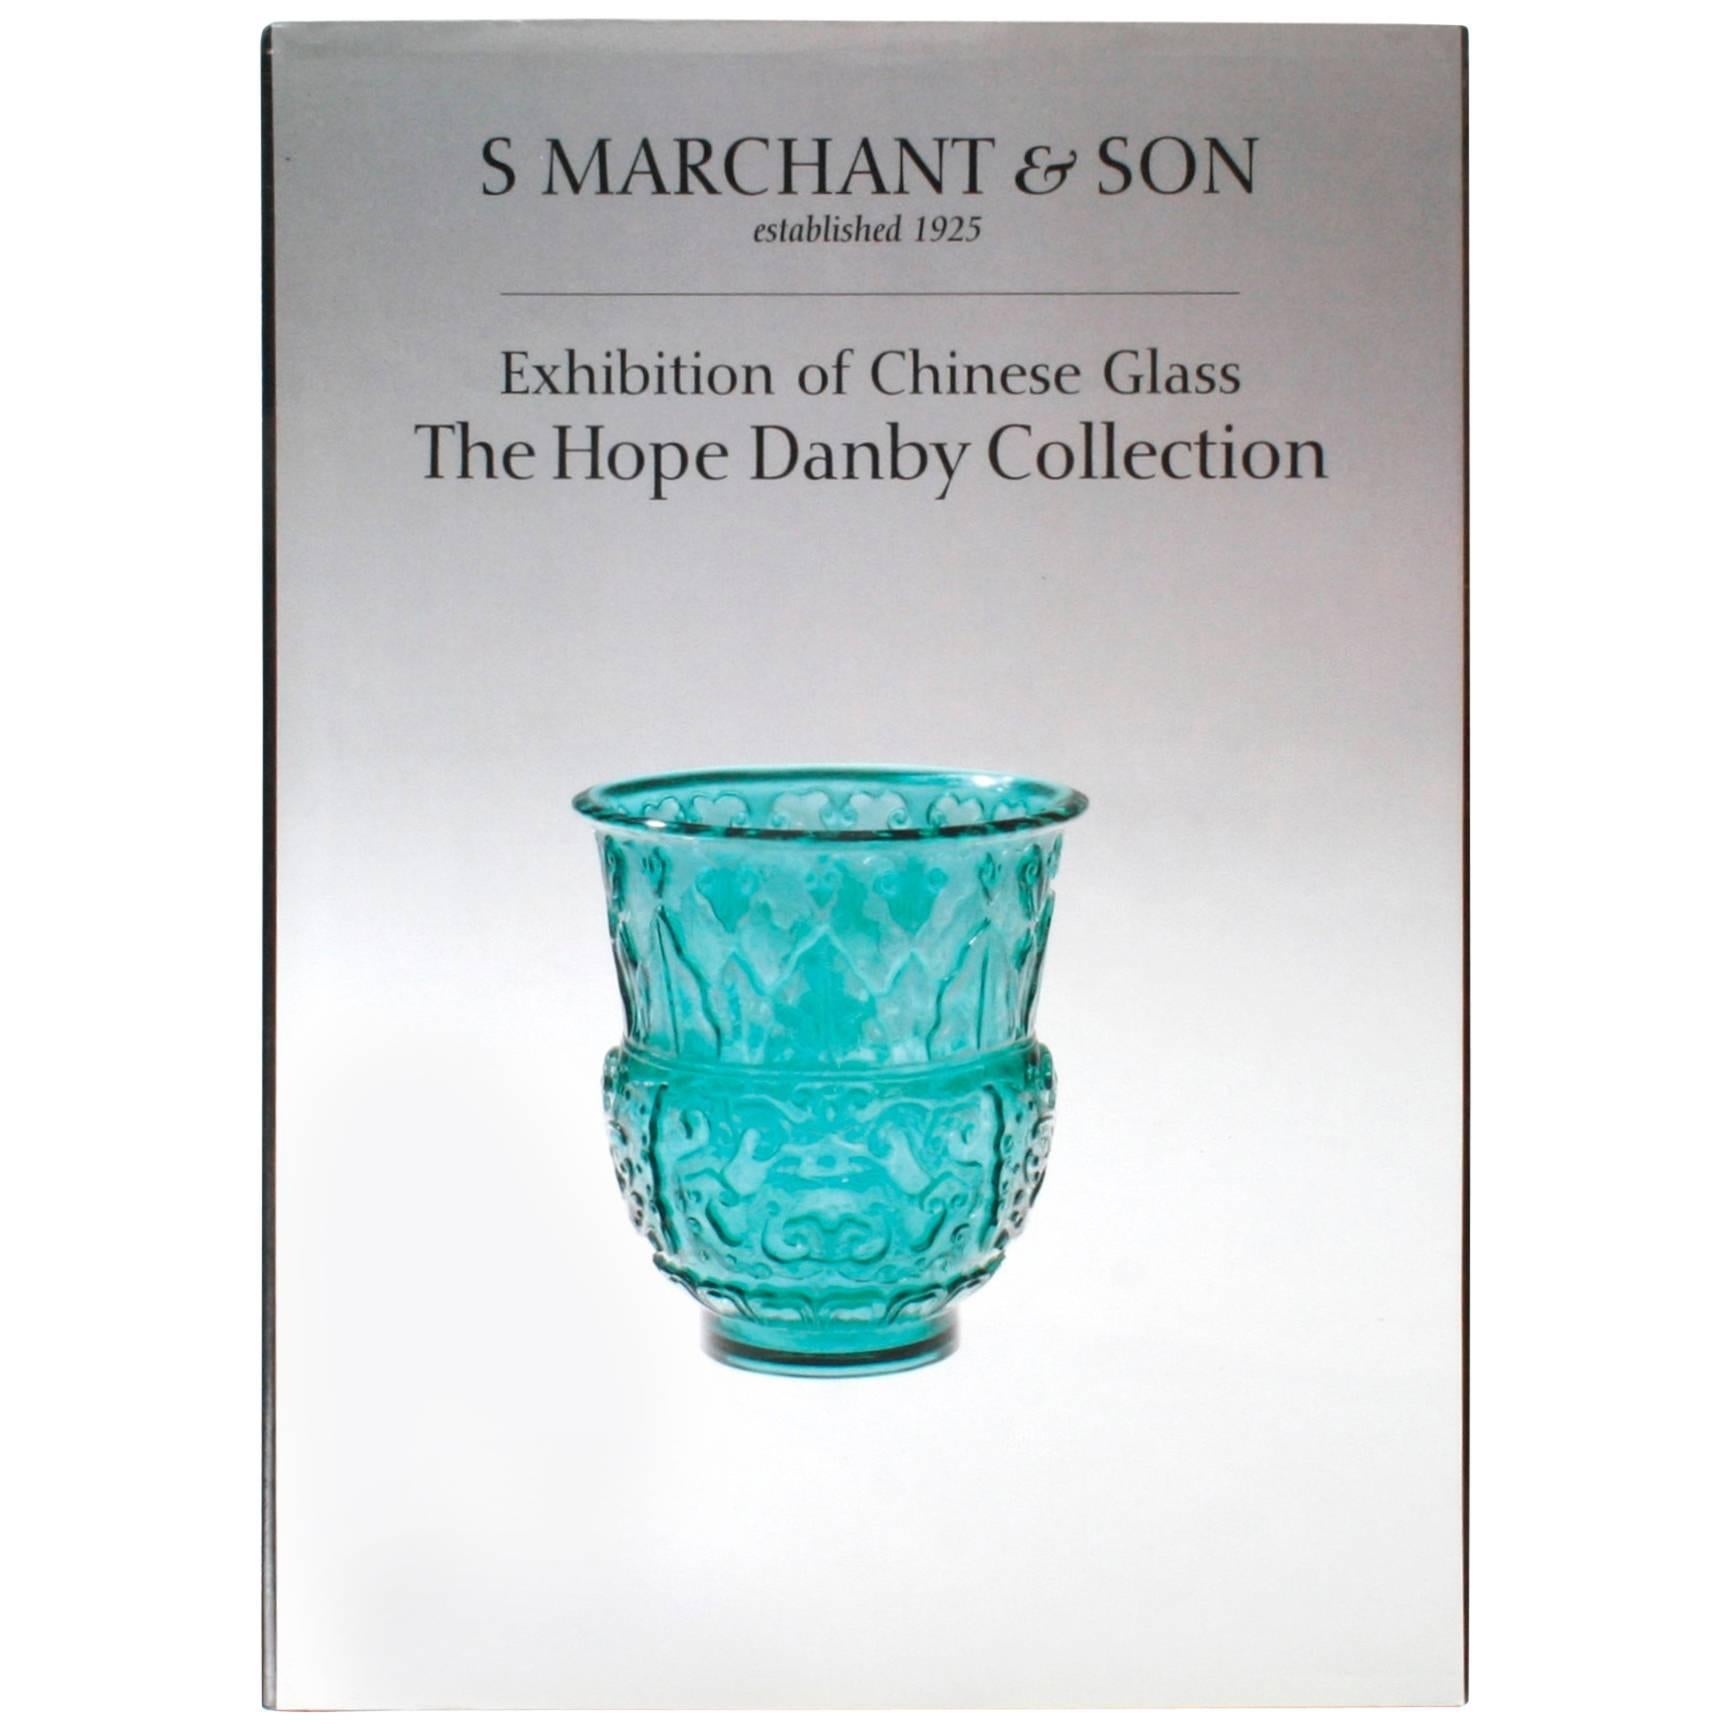 Exhibition Catalogue of Chinese Glass from the Hope Danby Collection